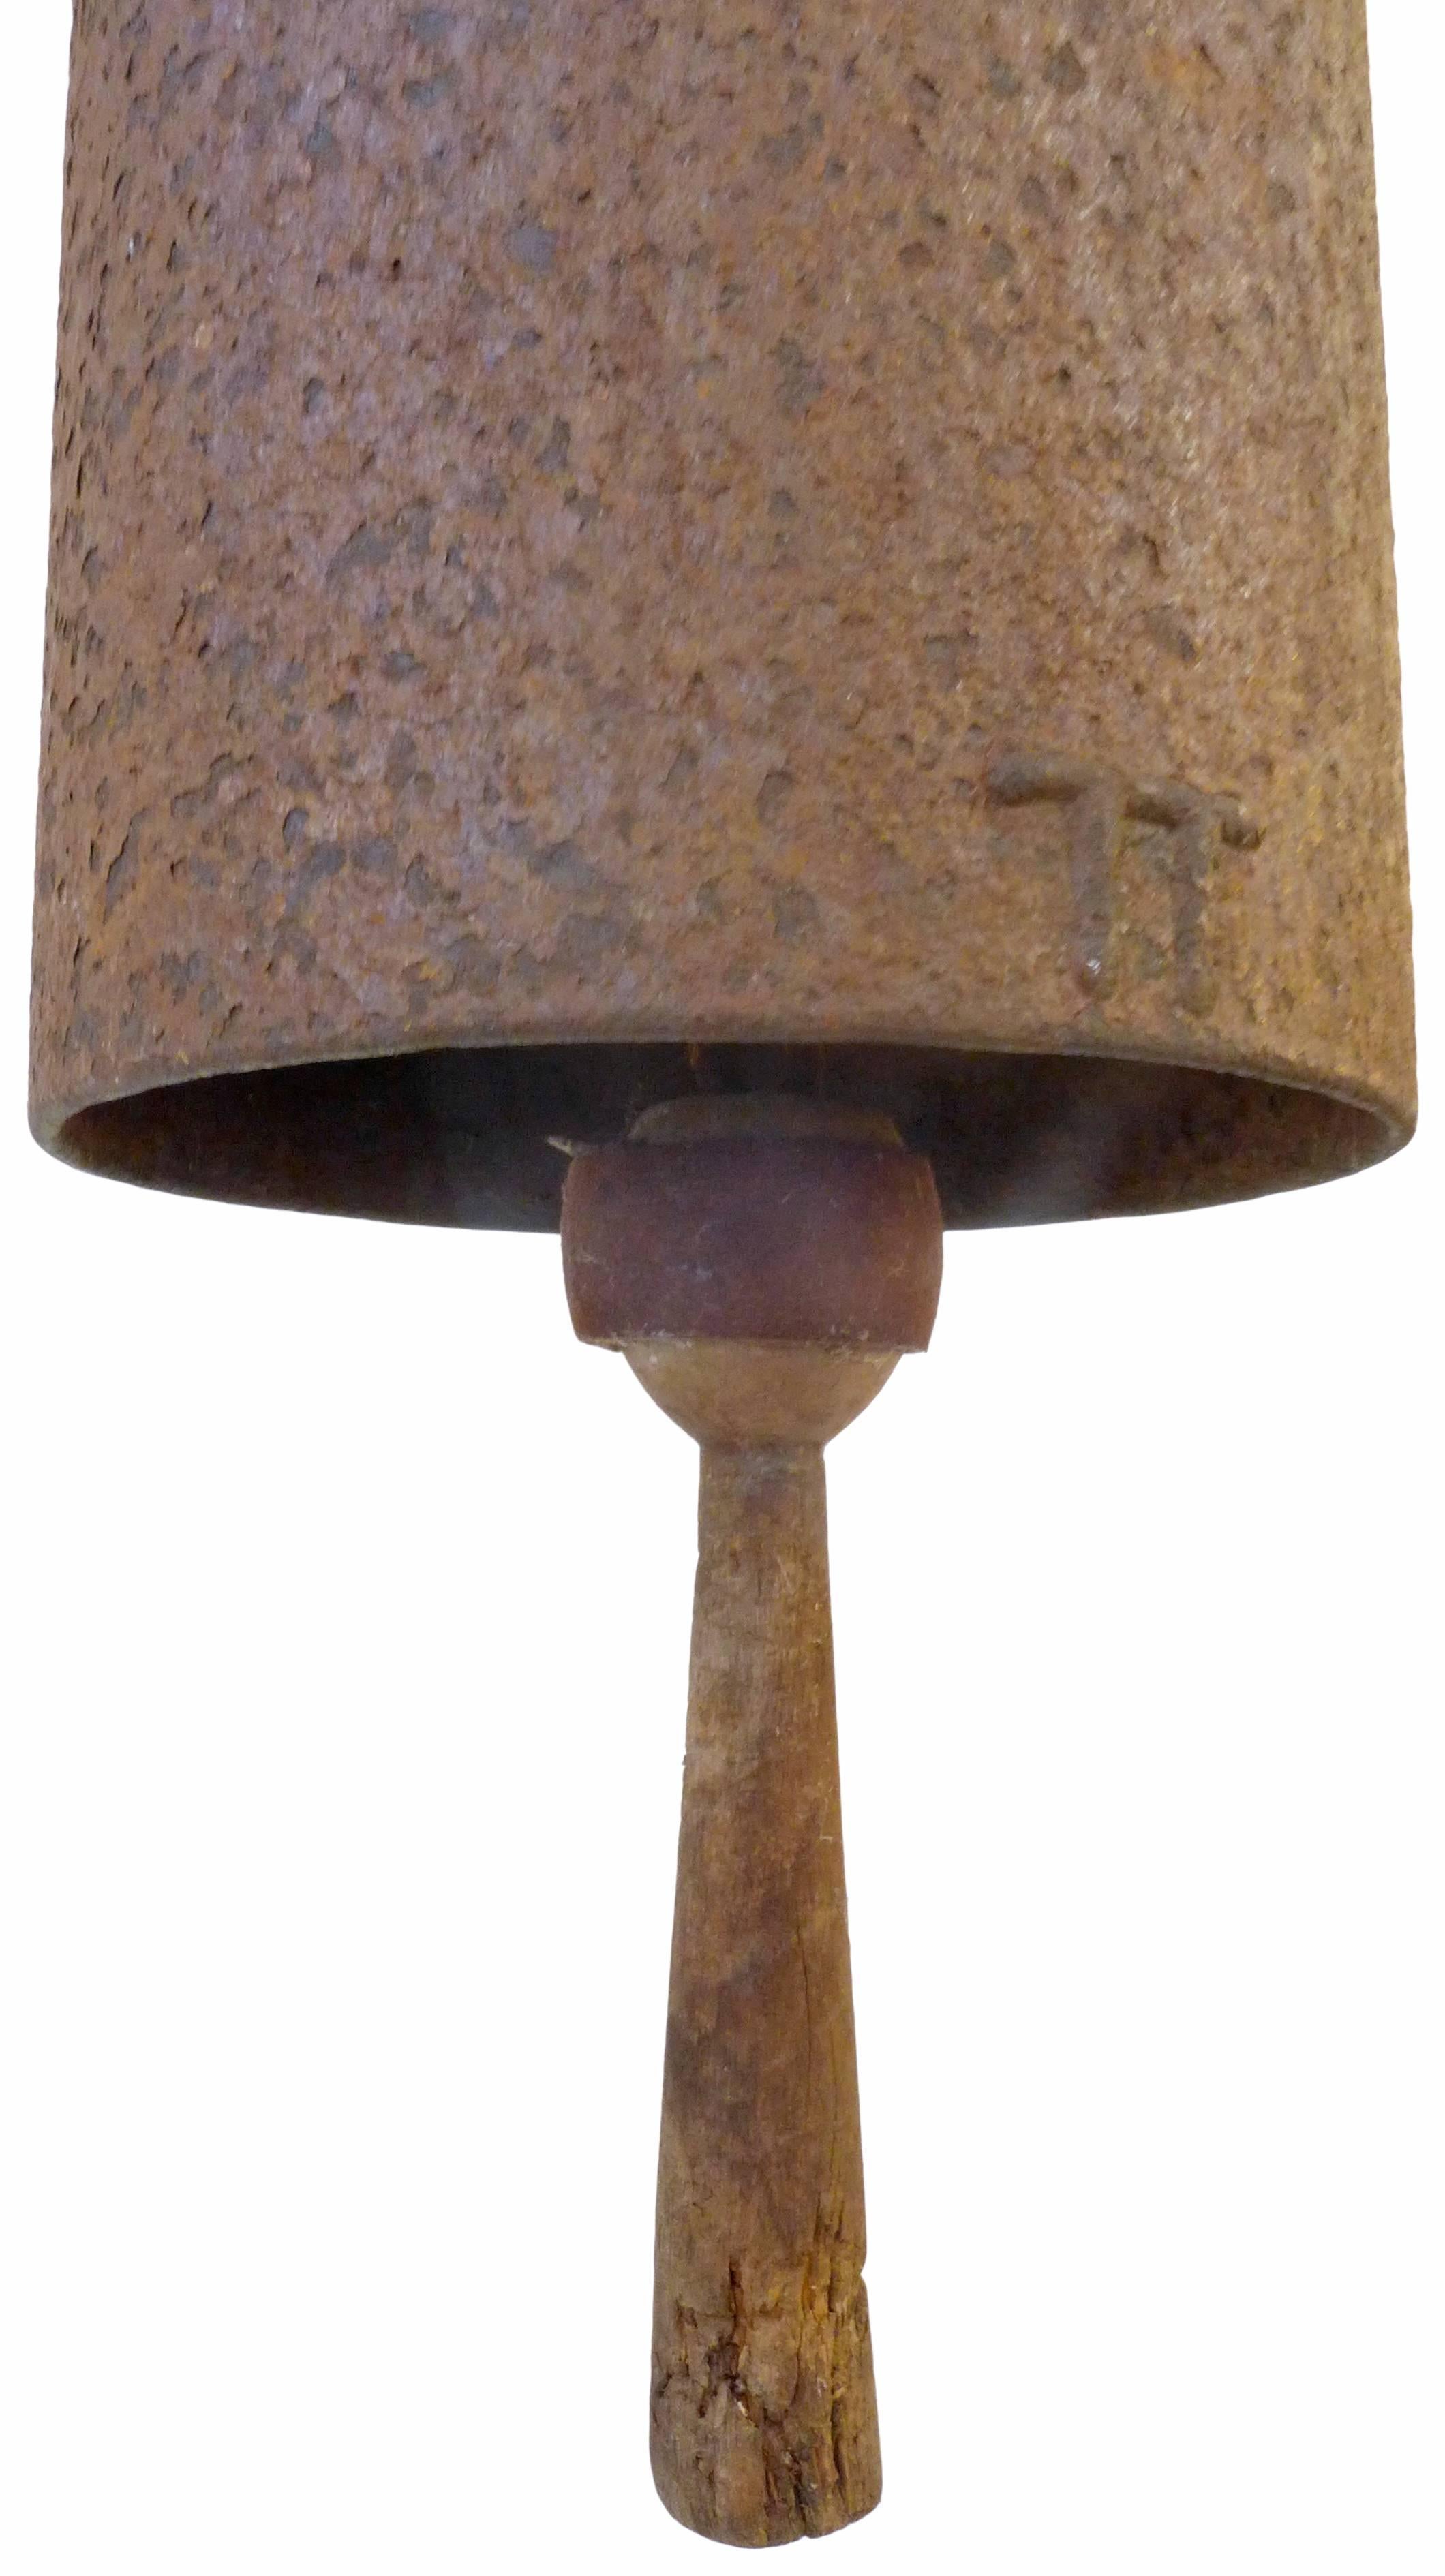 A striking cast iron garden bell. A modernist, sculptural form of clear eastern influence; a simple, domed cylinder wearing a commanding, ethnographic crown. Even oxidization all-over likely from years of life outdoors. A leather-wrapped,